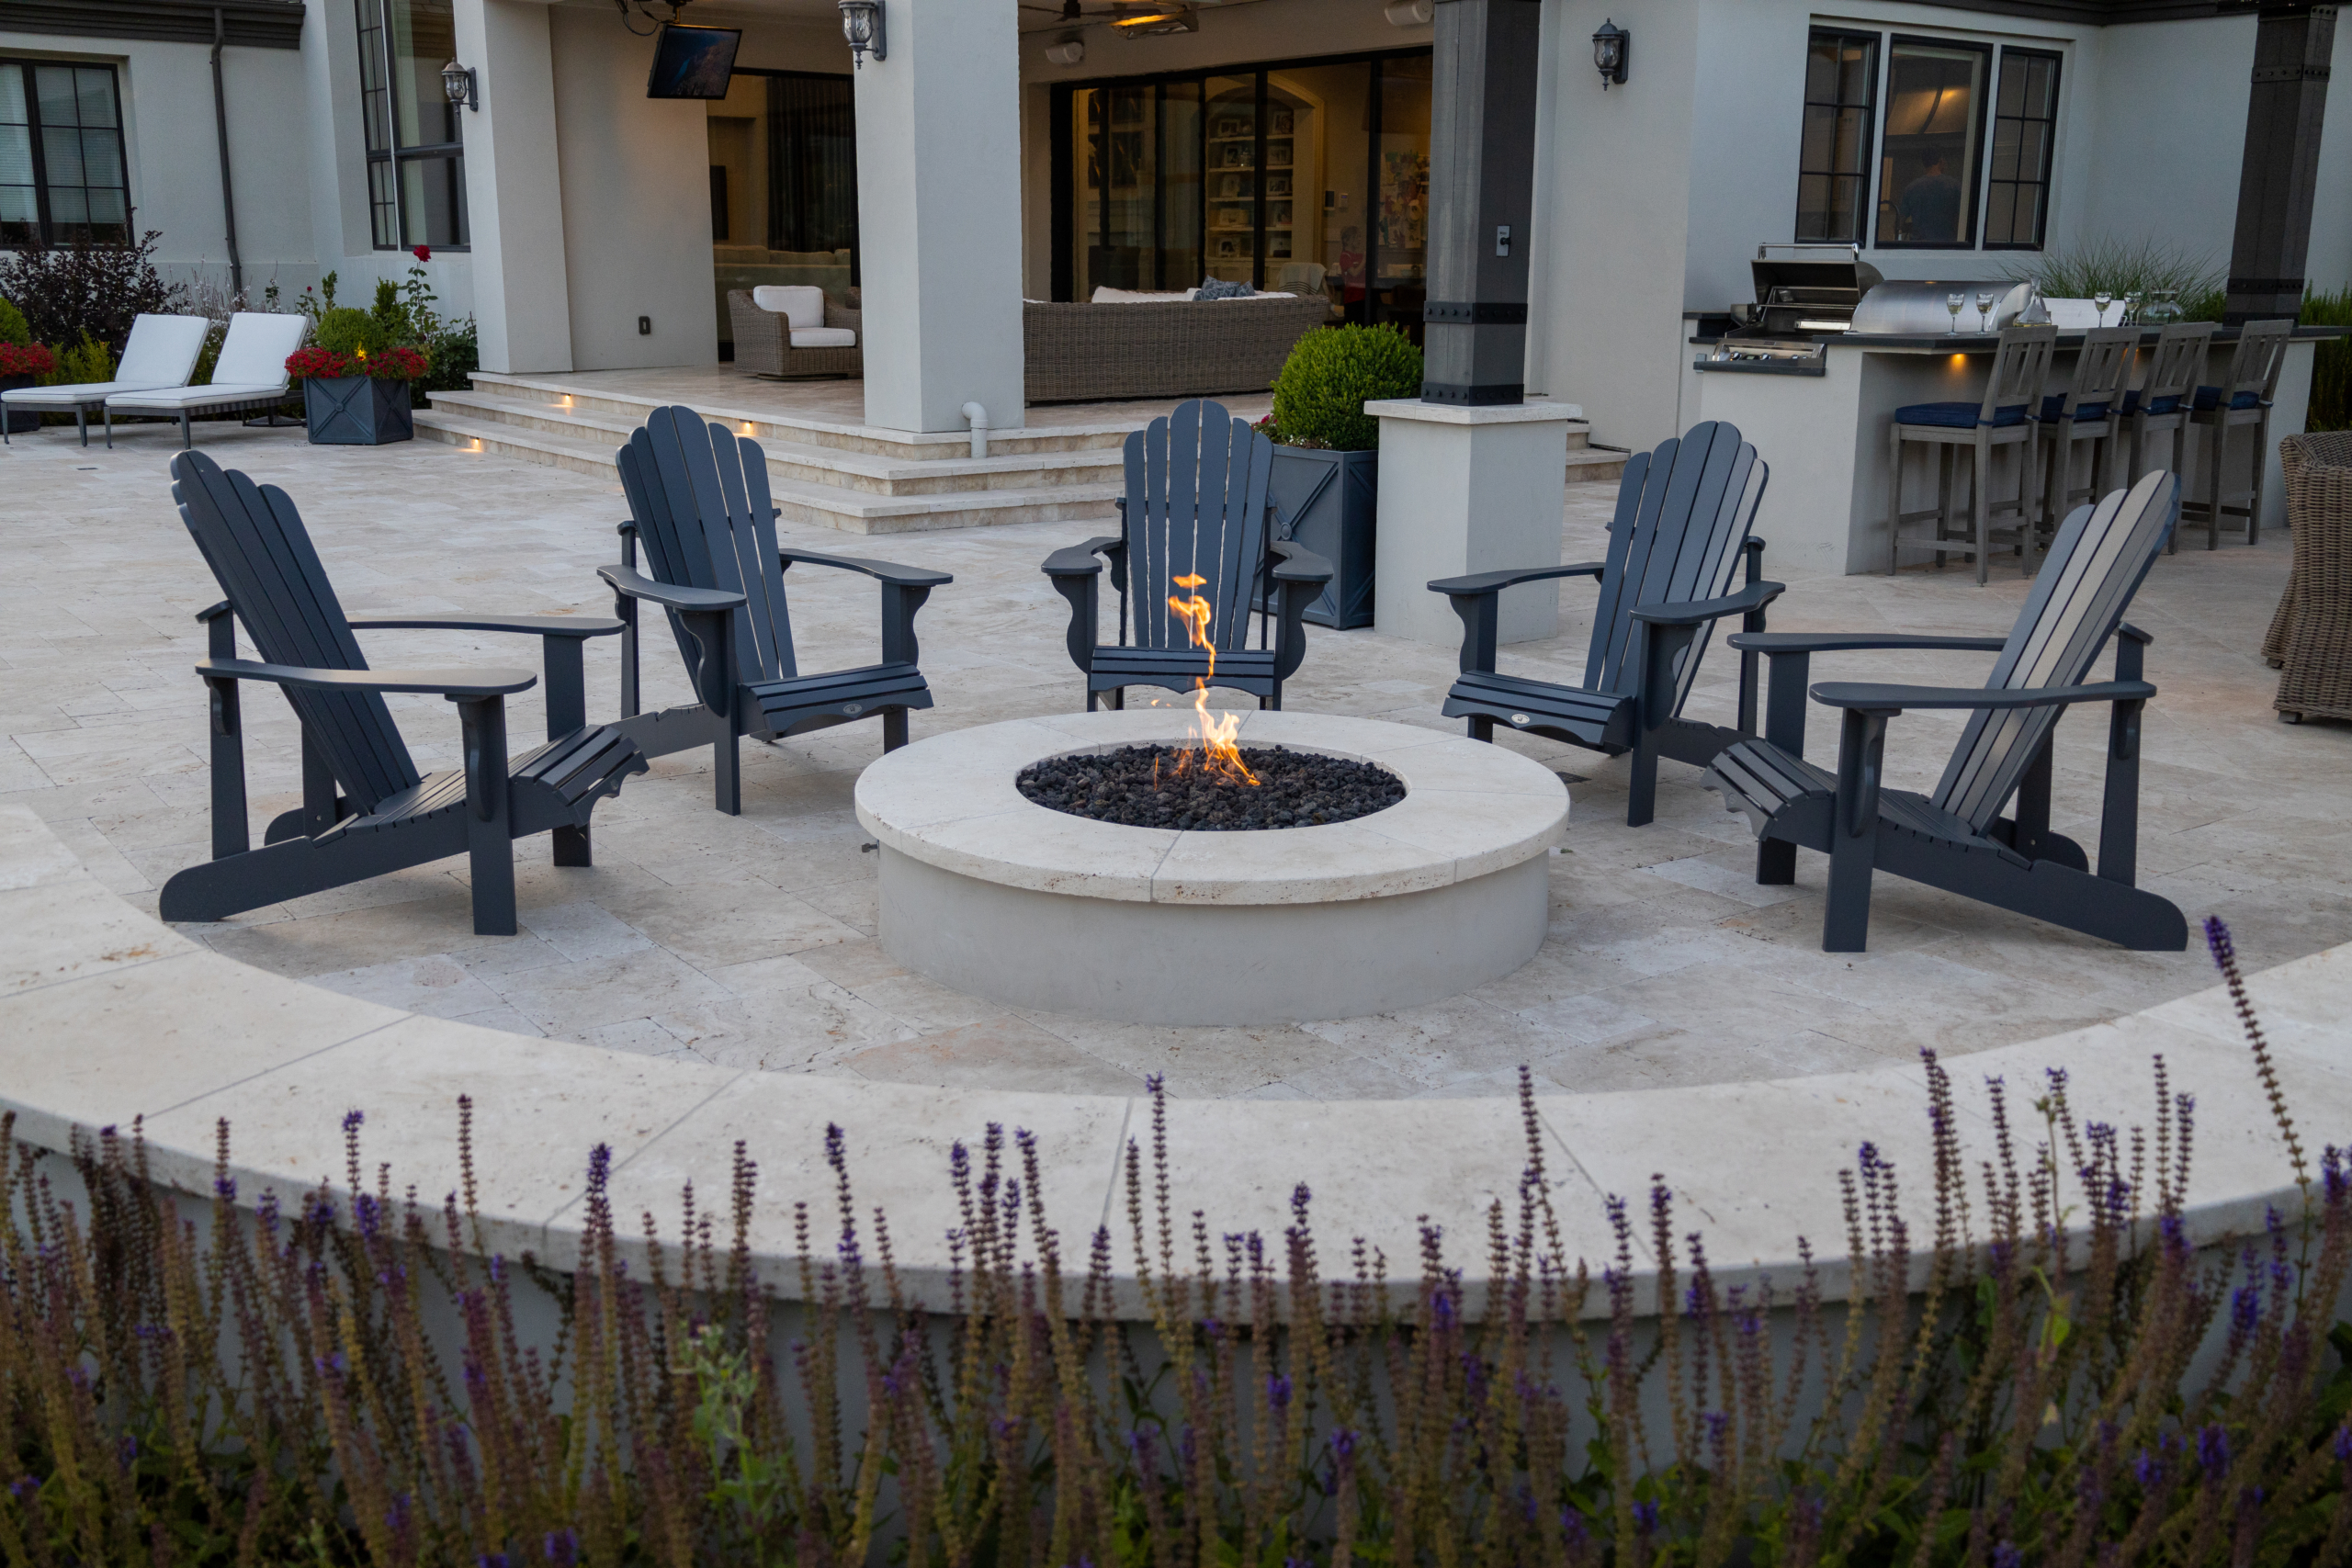 Modern round firepit with Adirondack chairs